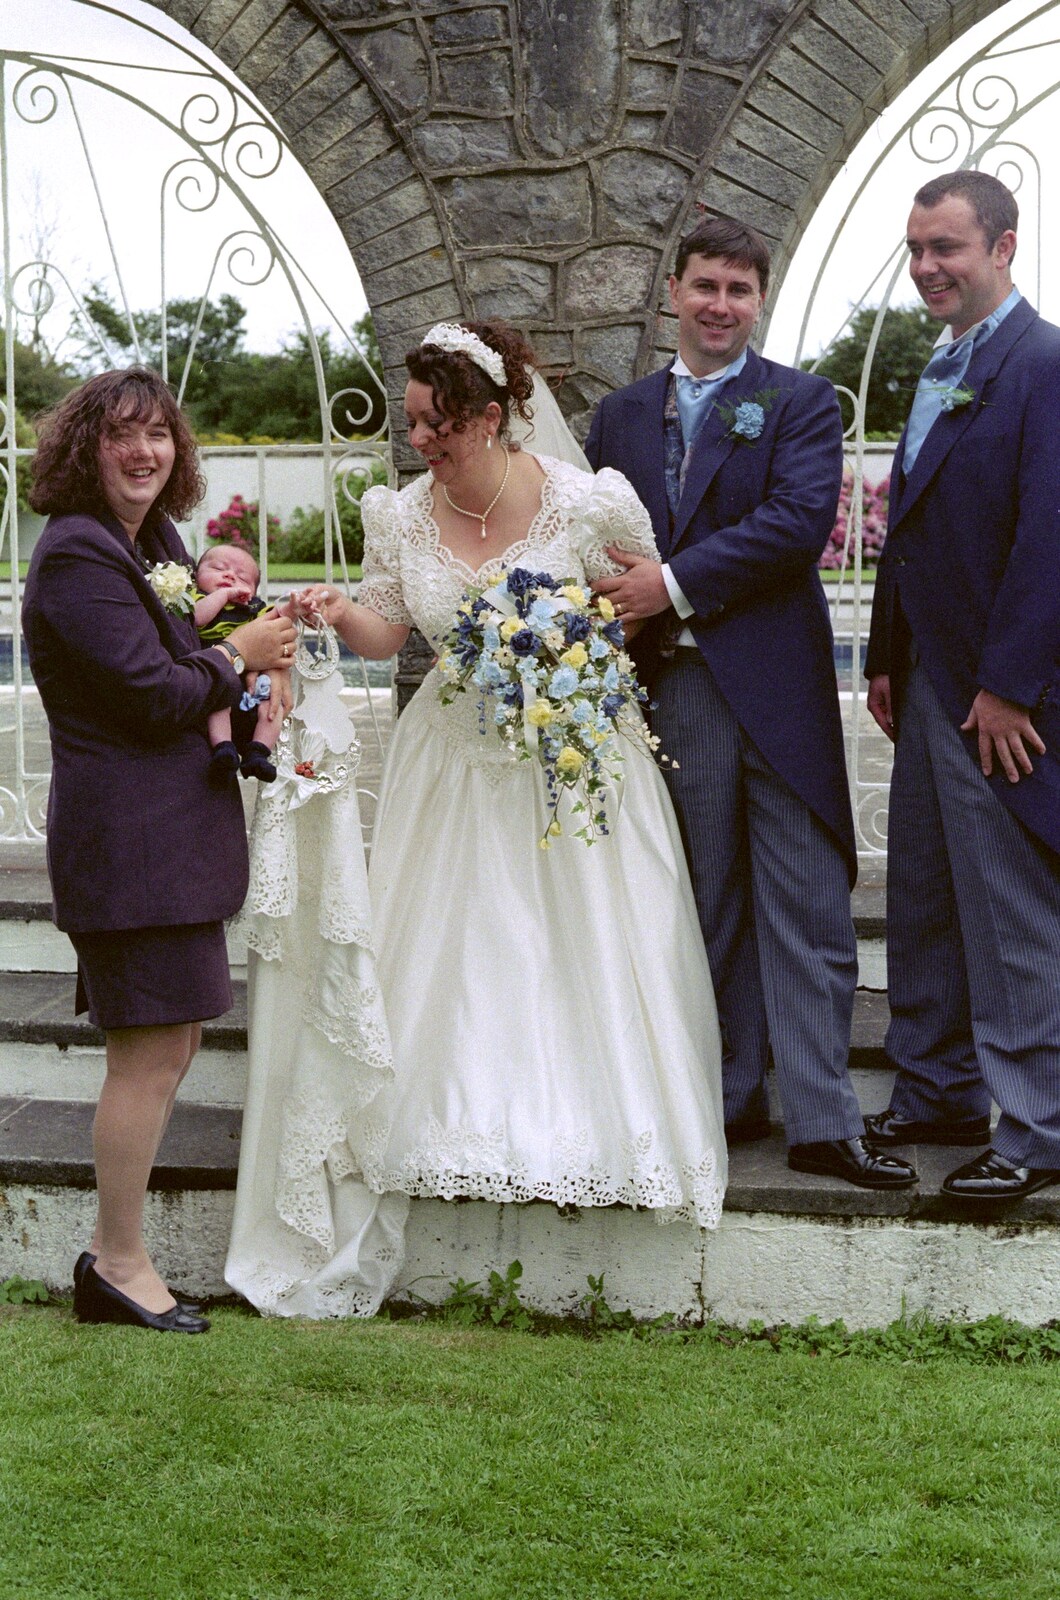 Riki's Wedding, Treboeth, Swansea - 7th May 1996: Riki's sister - Cath 'The Fish' - comes over